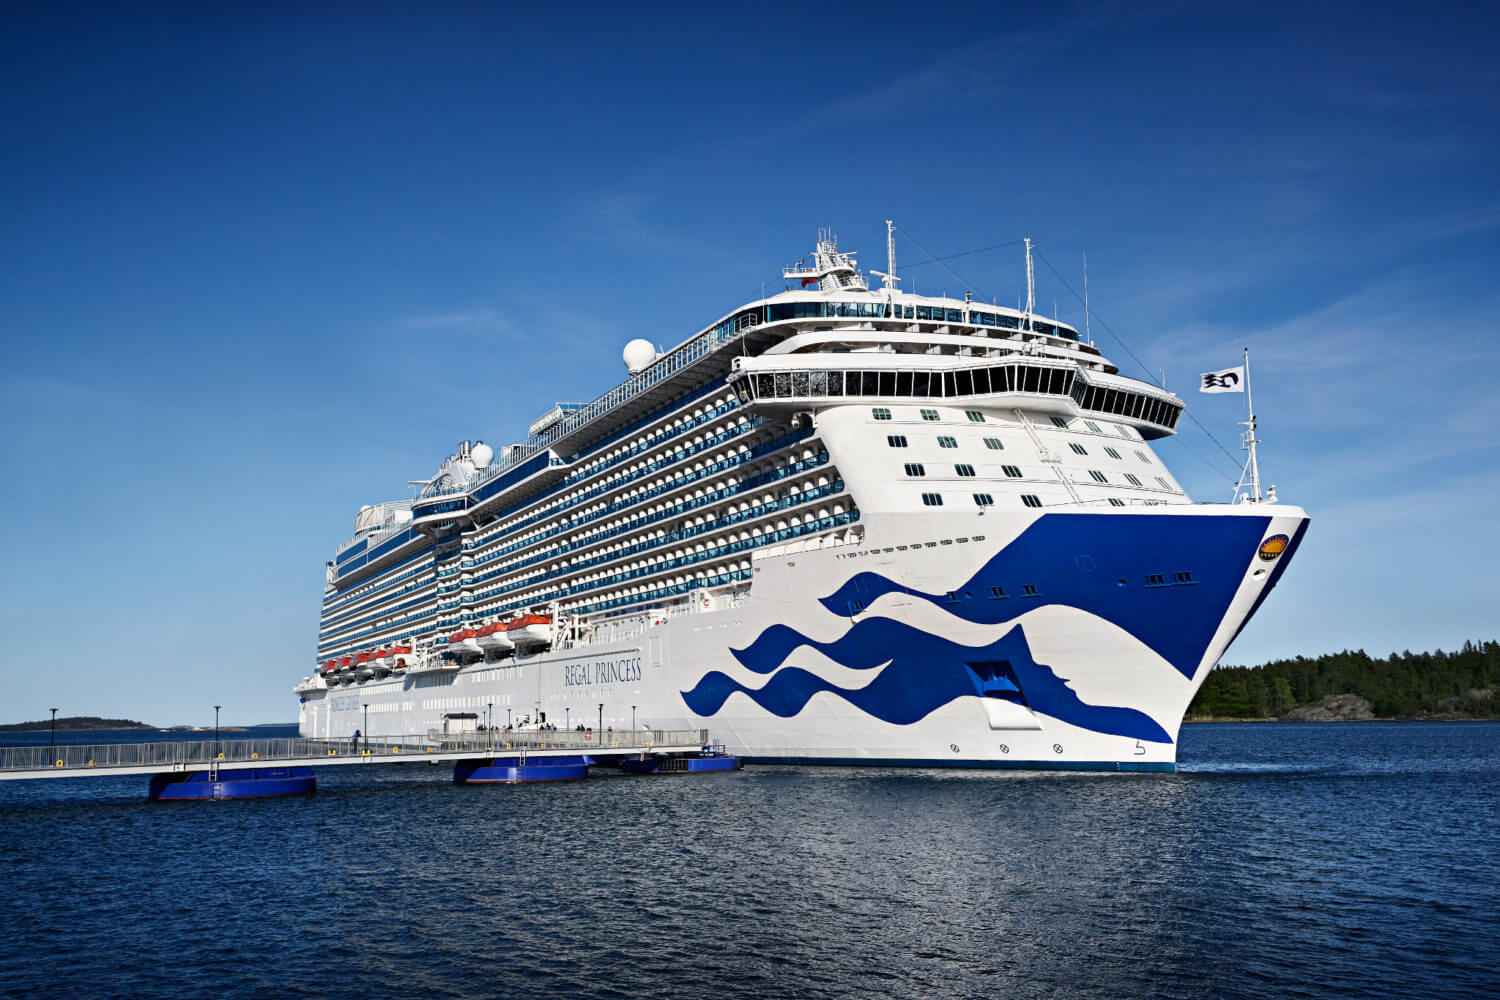 Princess Cruises - Cruise Vacation to Your Favourite Destinations